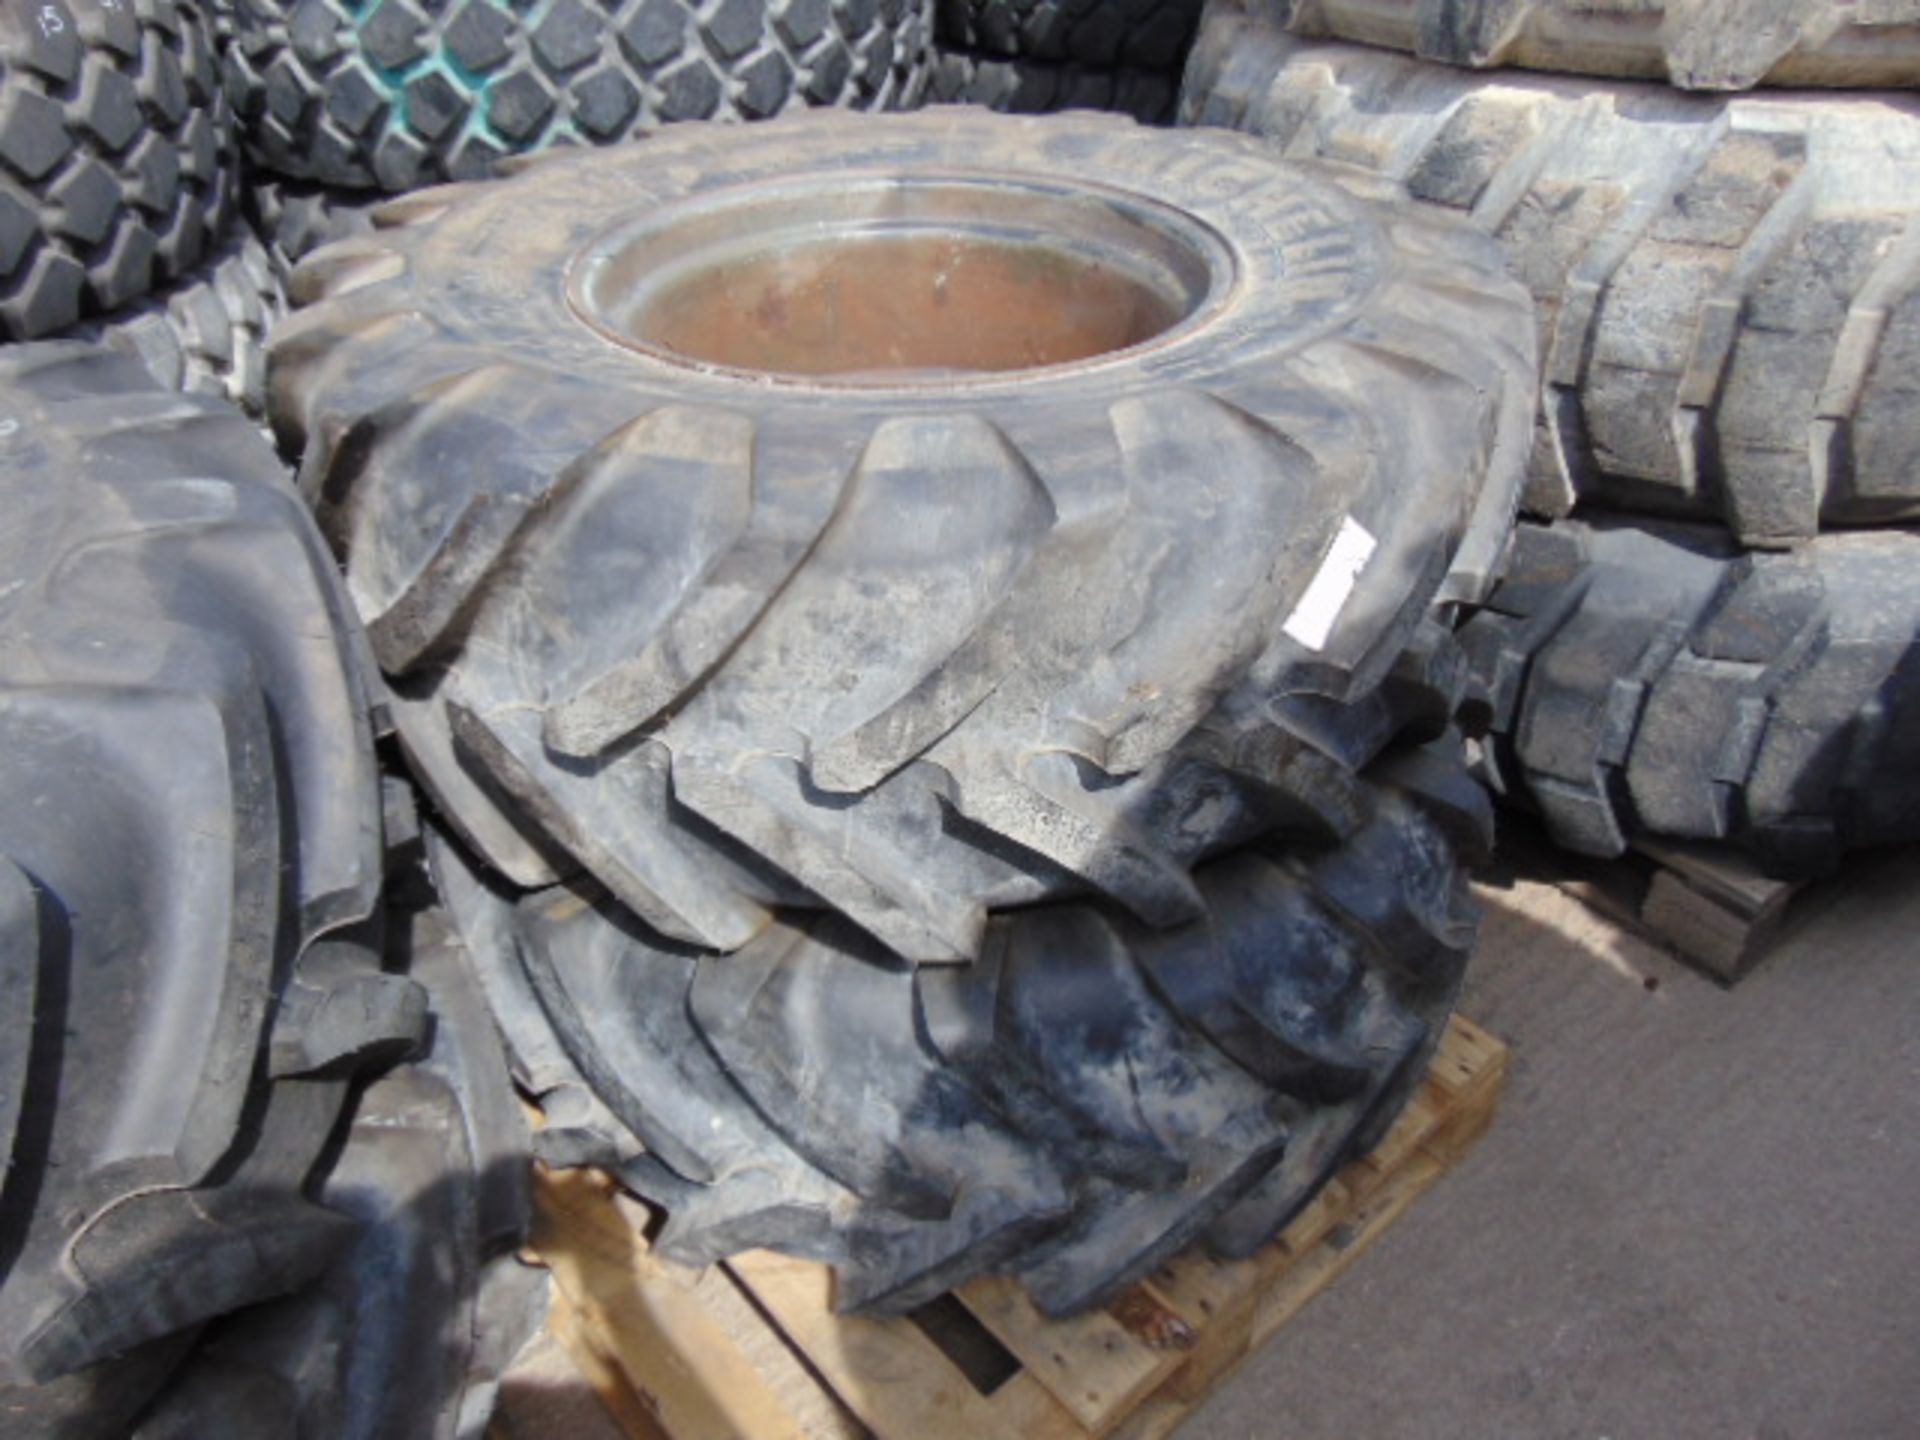 2 x Michelin 445/70 R24 XM47 Tyres complete with 10 stud rims